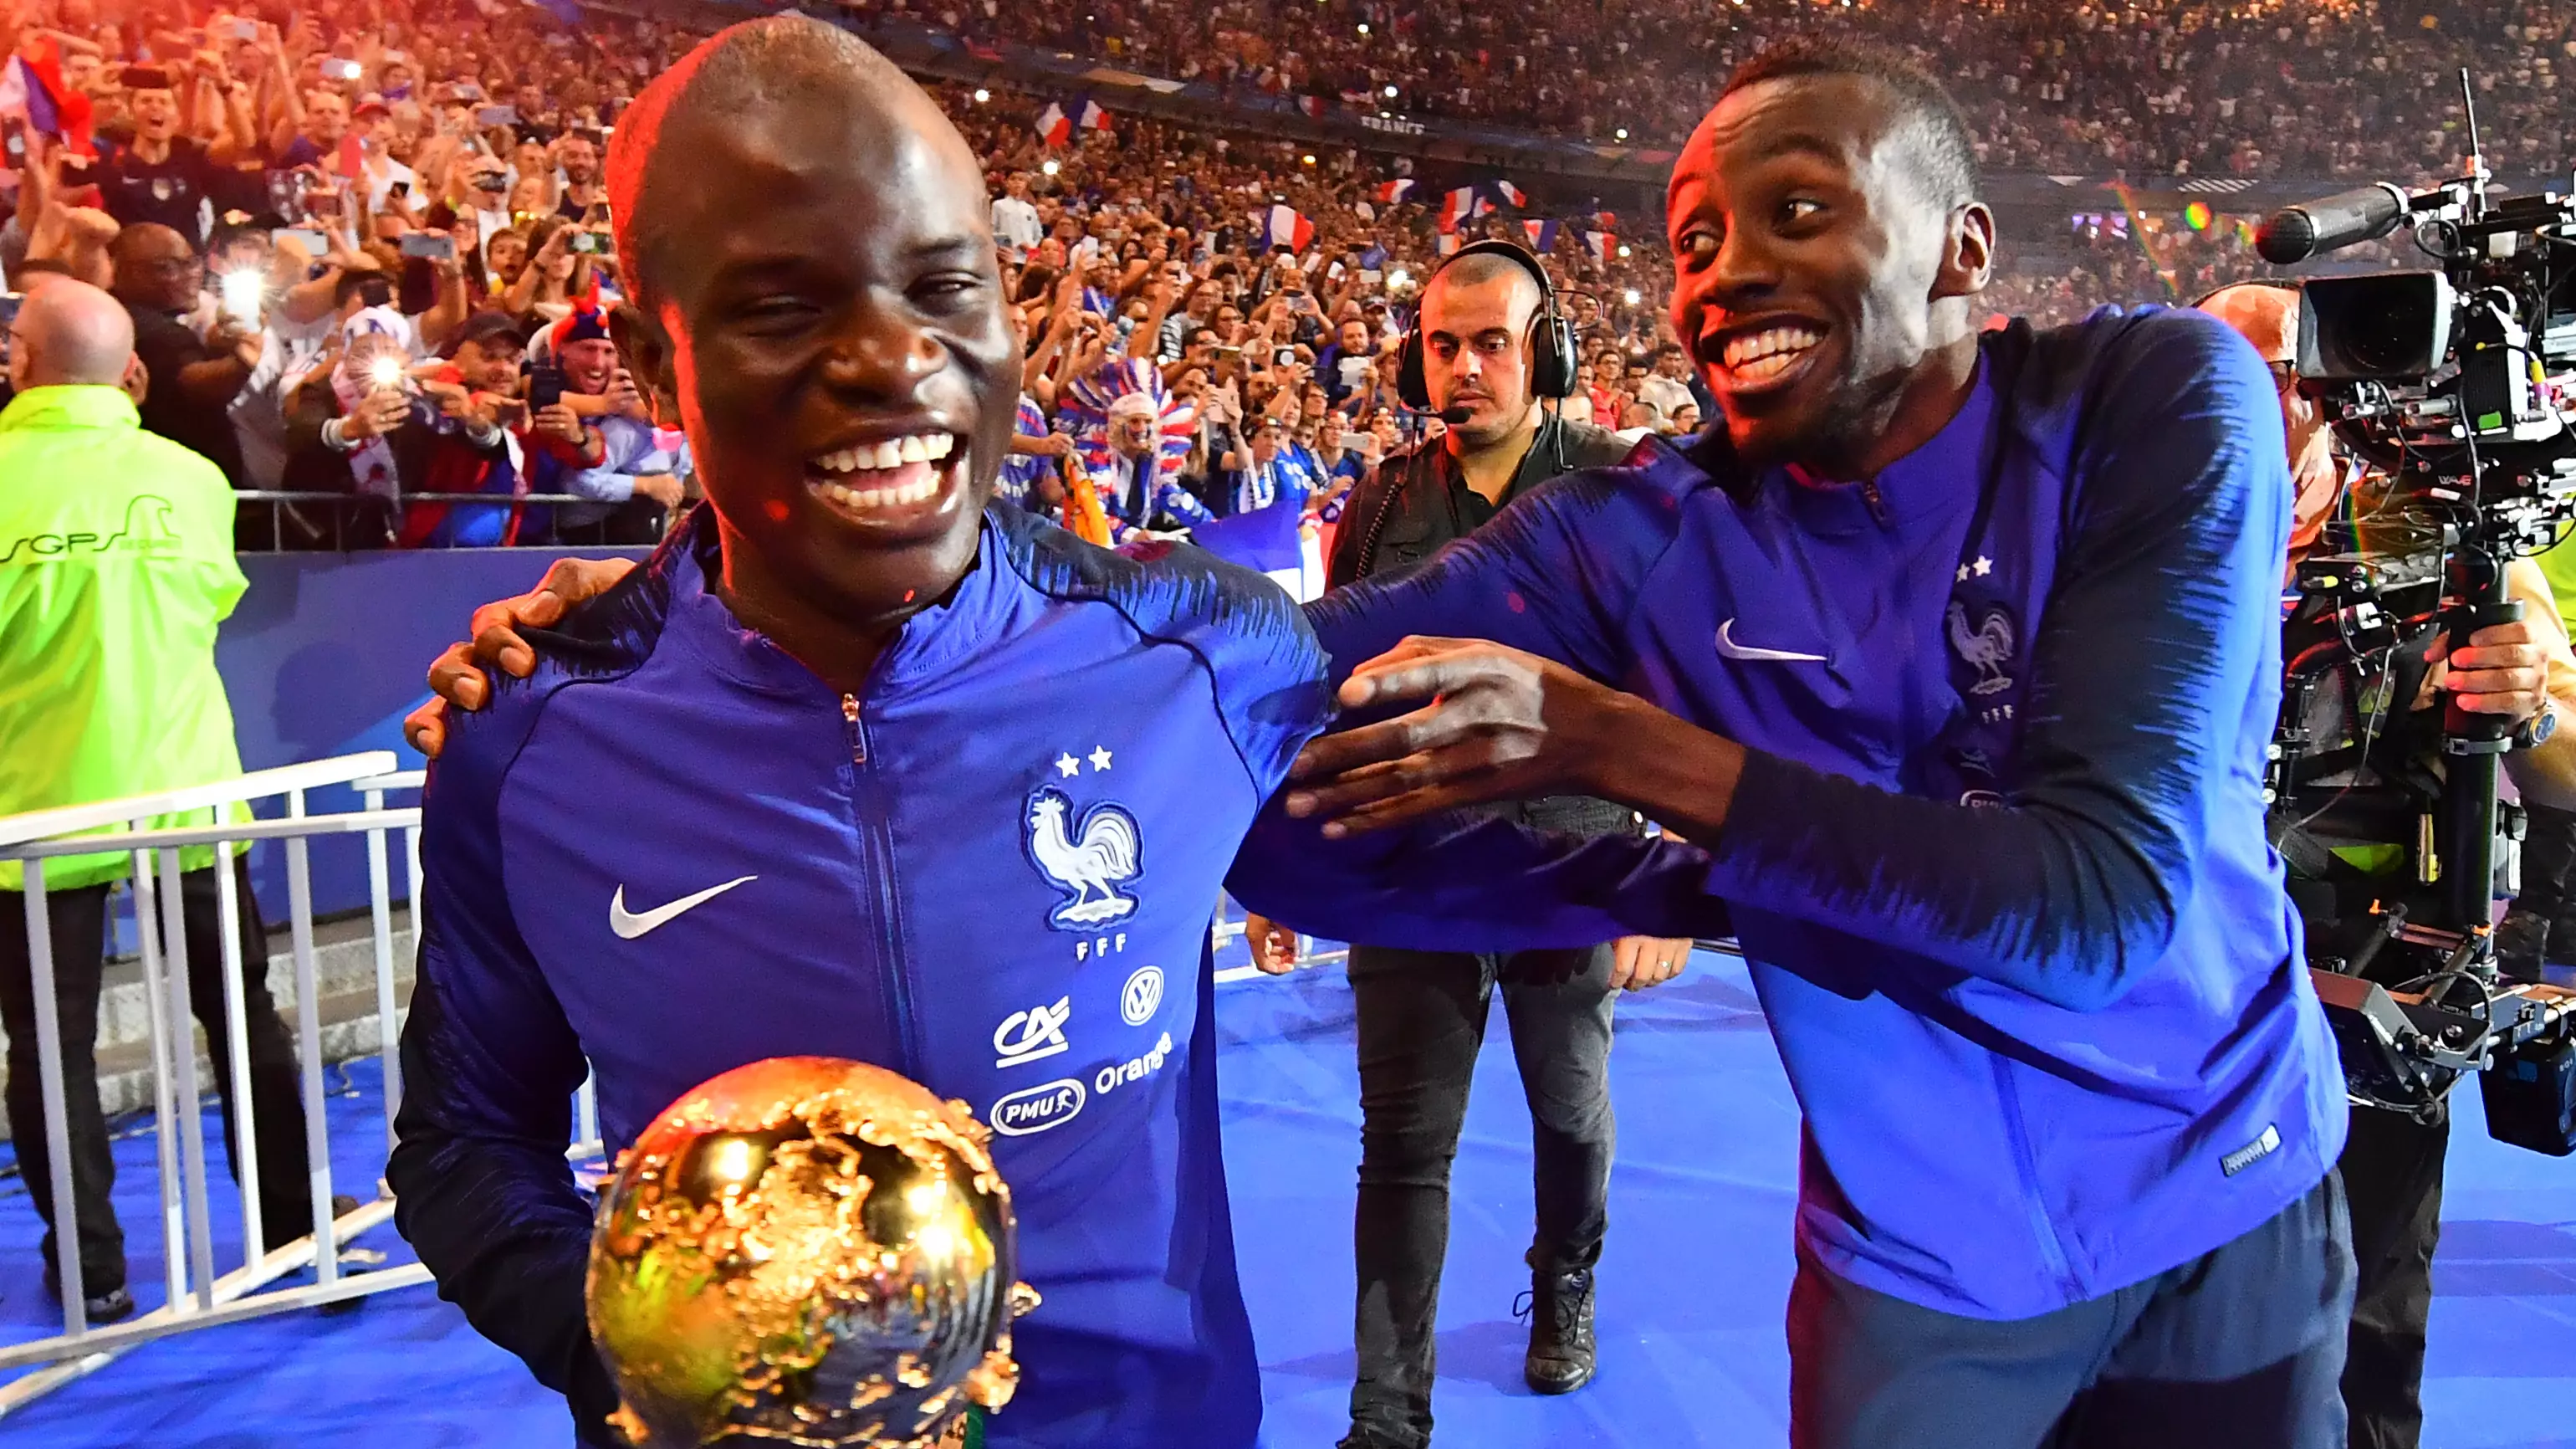 N'Golo Kante Accepts Dinner Invite From Fan, They Eat Curry, Watch 'Match Of The Day' And Play ''FIFA'